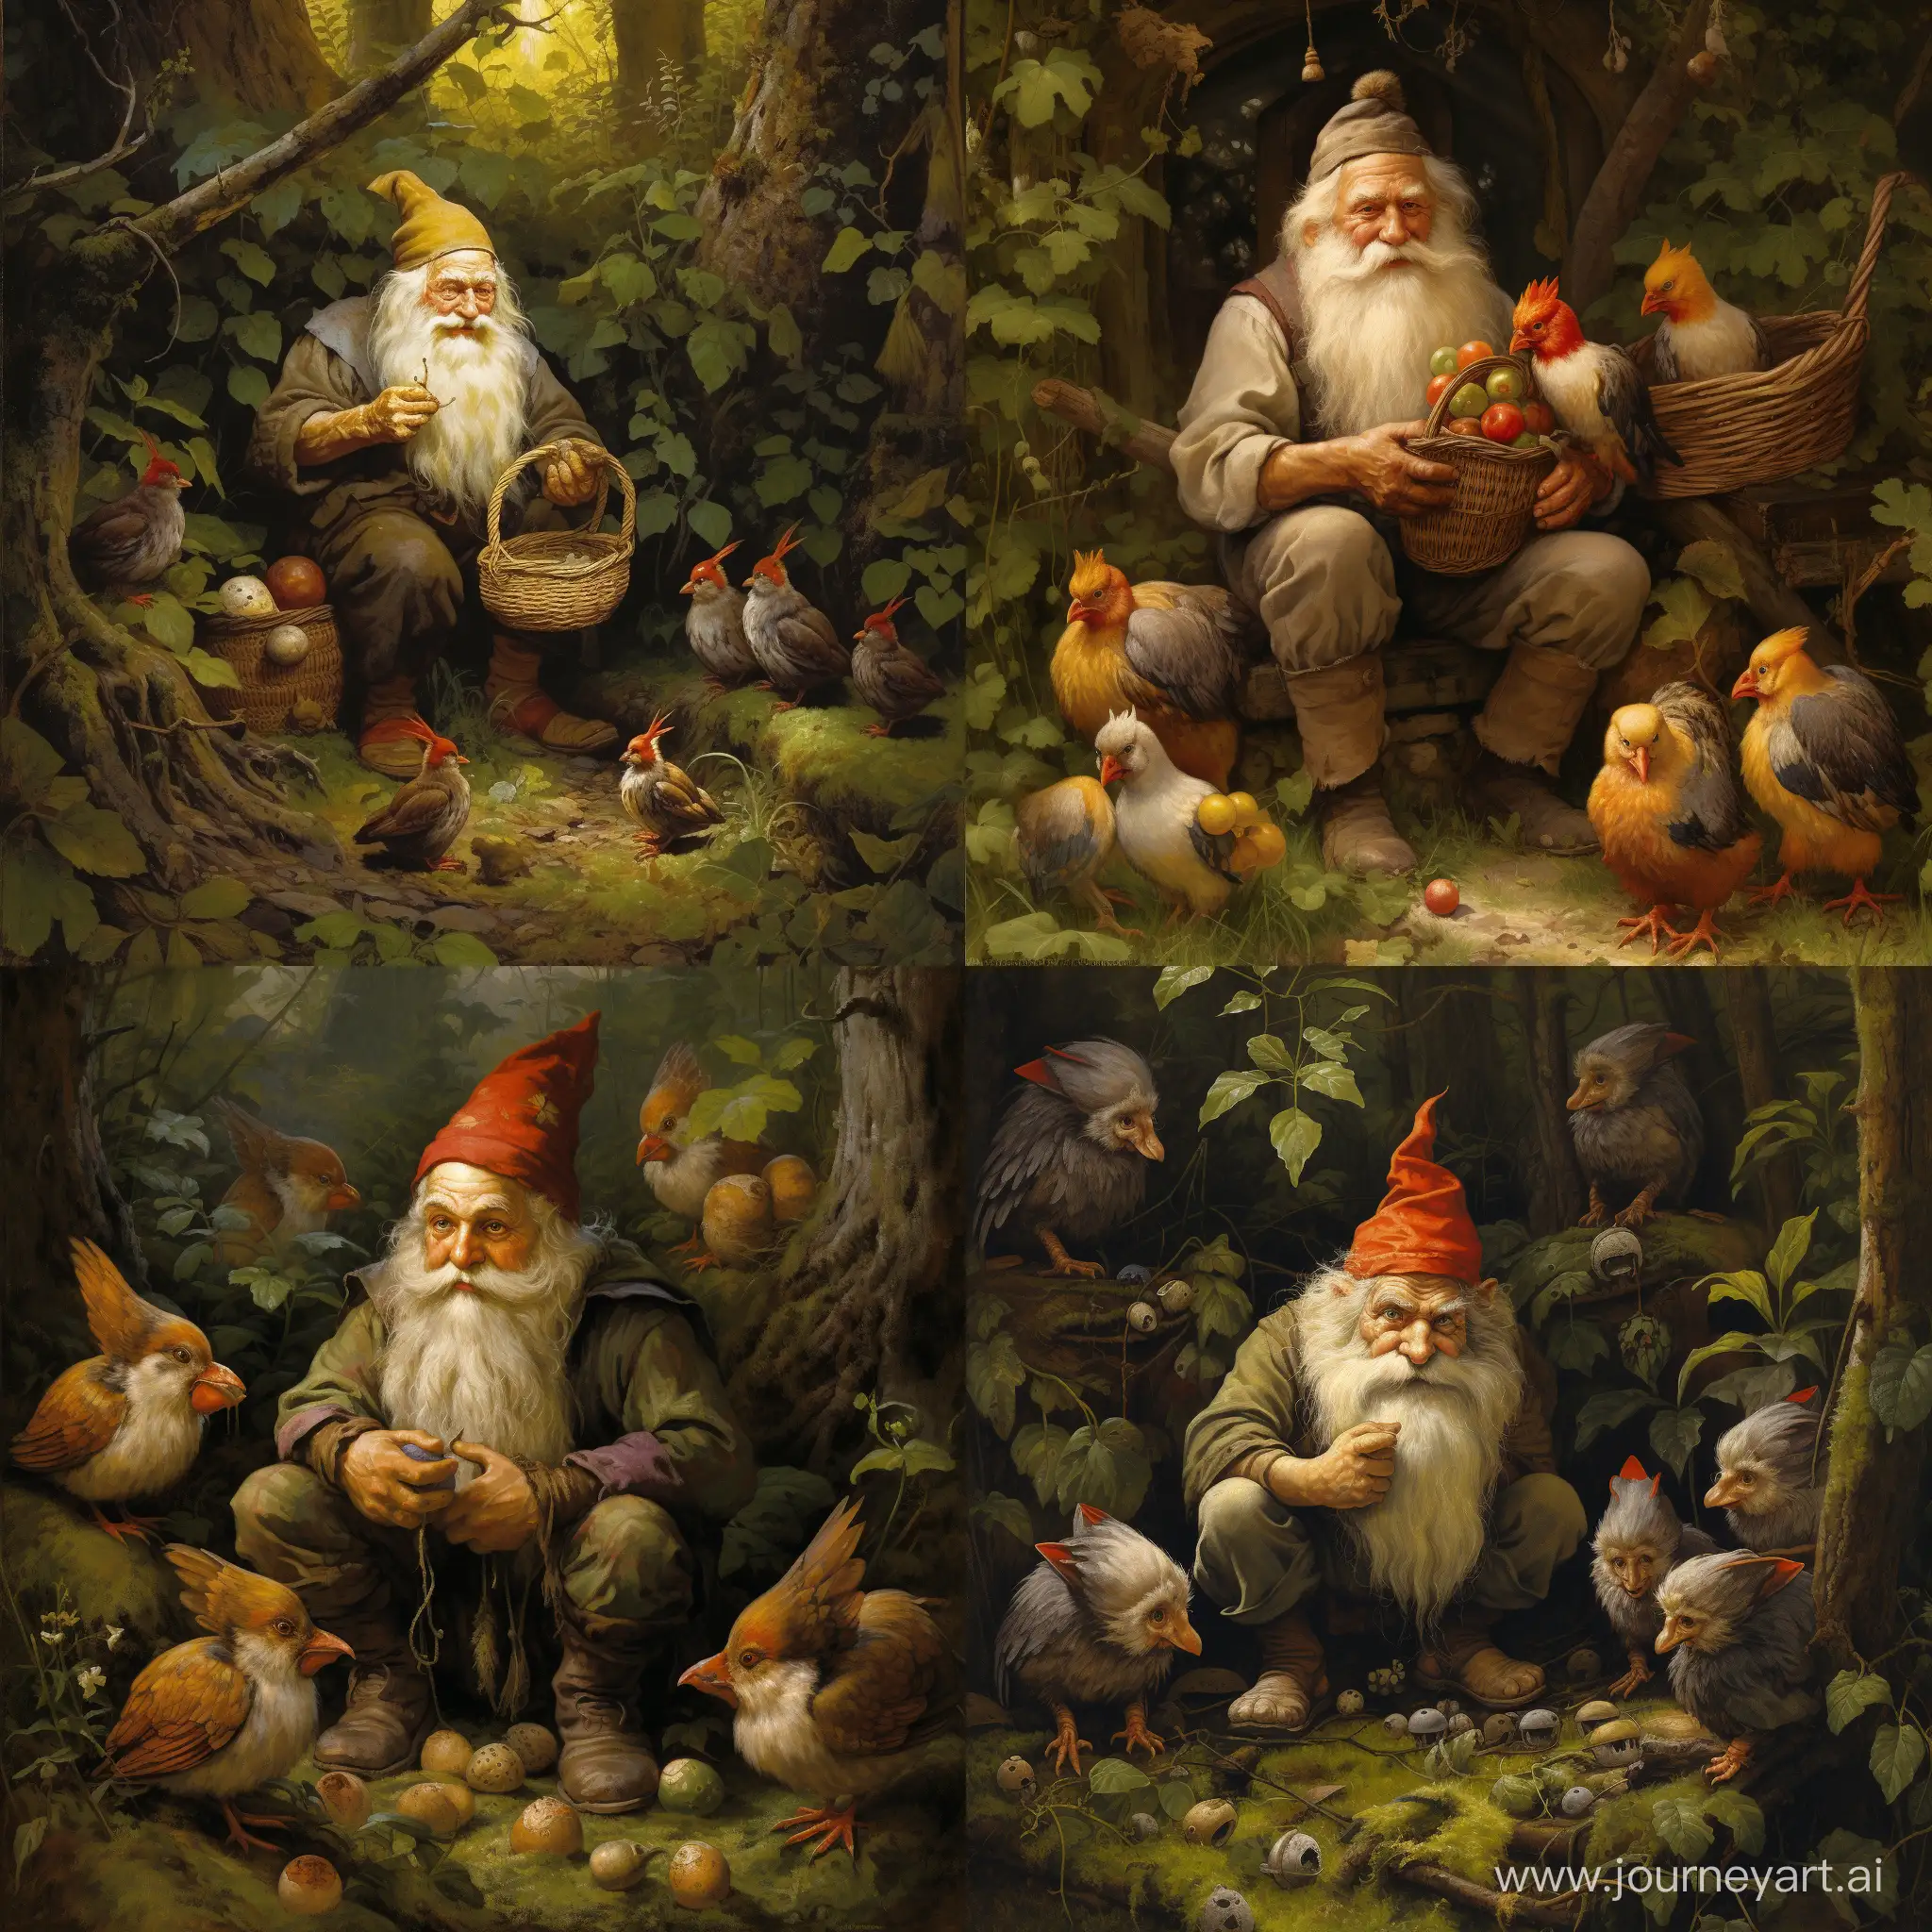 Enchanting-Gnomes-Forest-Dwelling-with-Five-Feathered-Companions